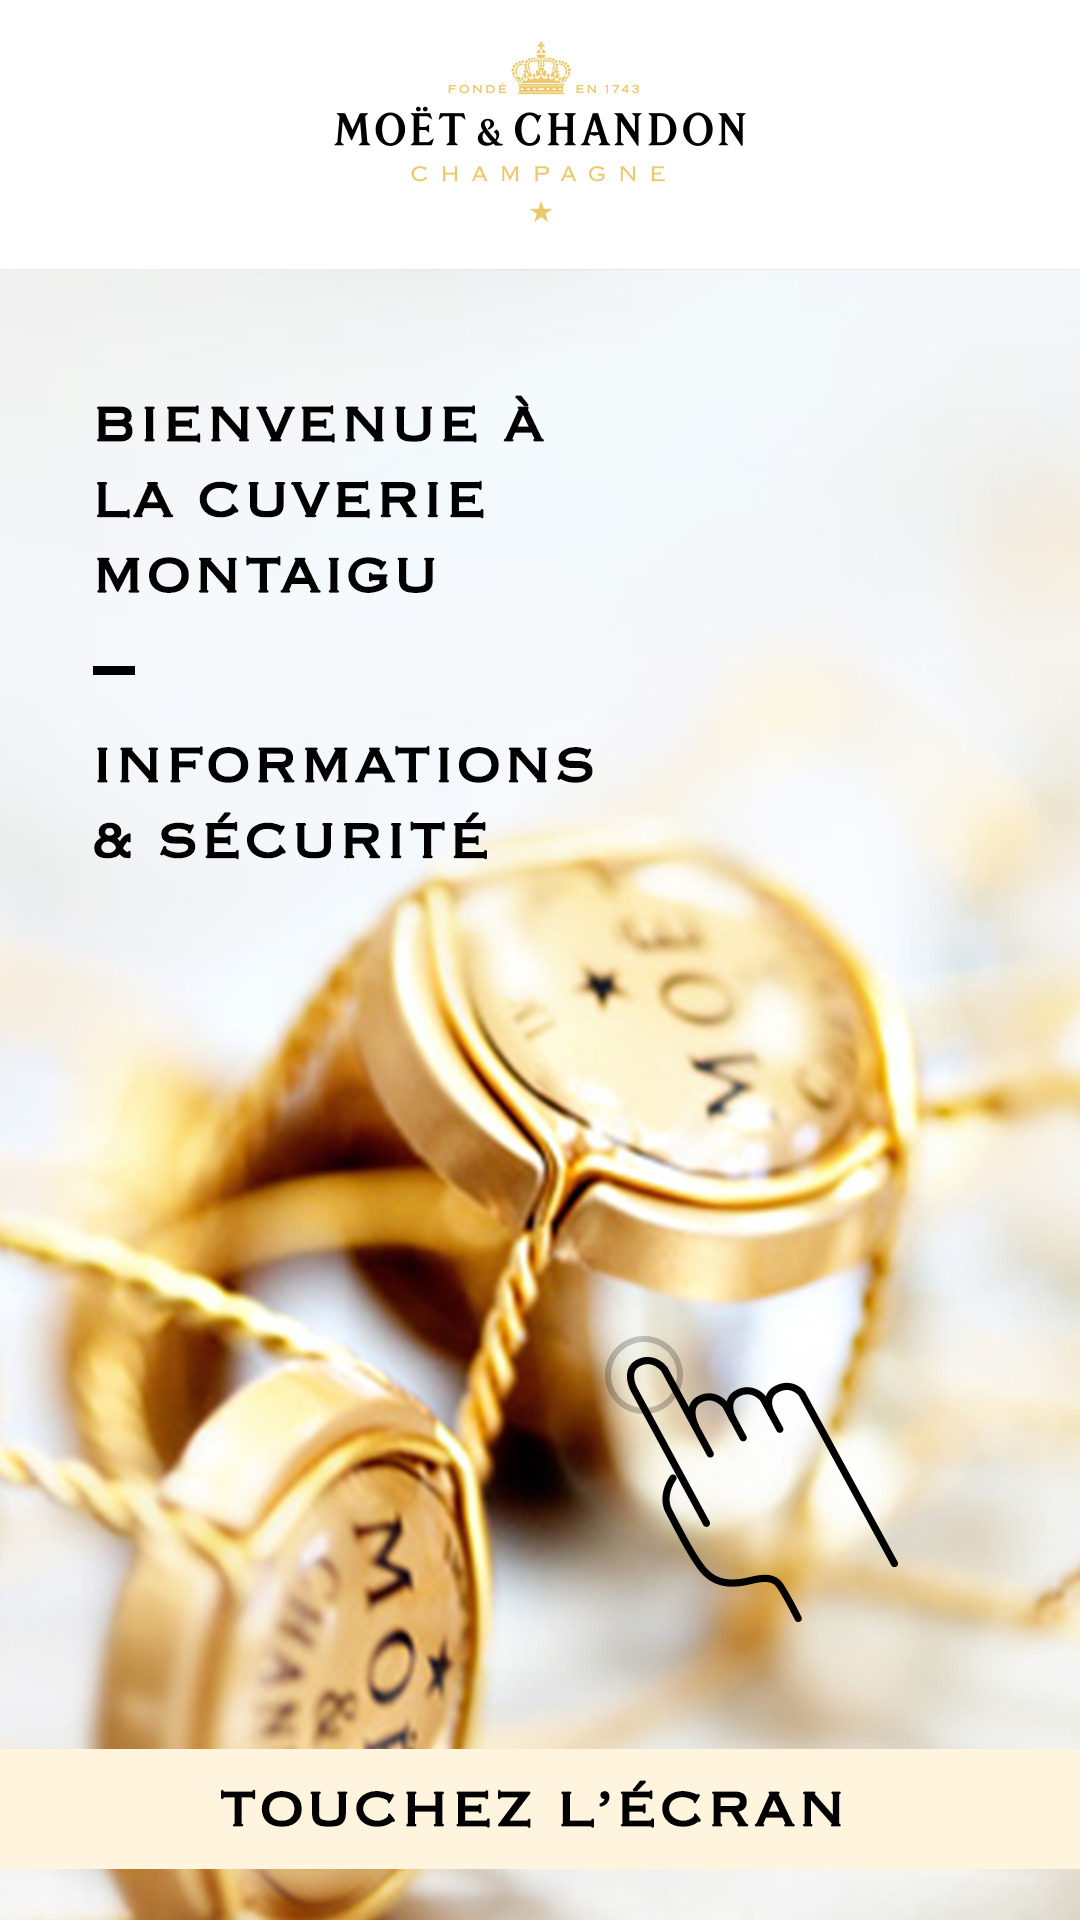 LVMH's Champagne Brand Moët & Chandon With ViaDirect's Wayfinding